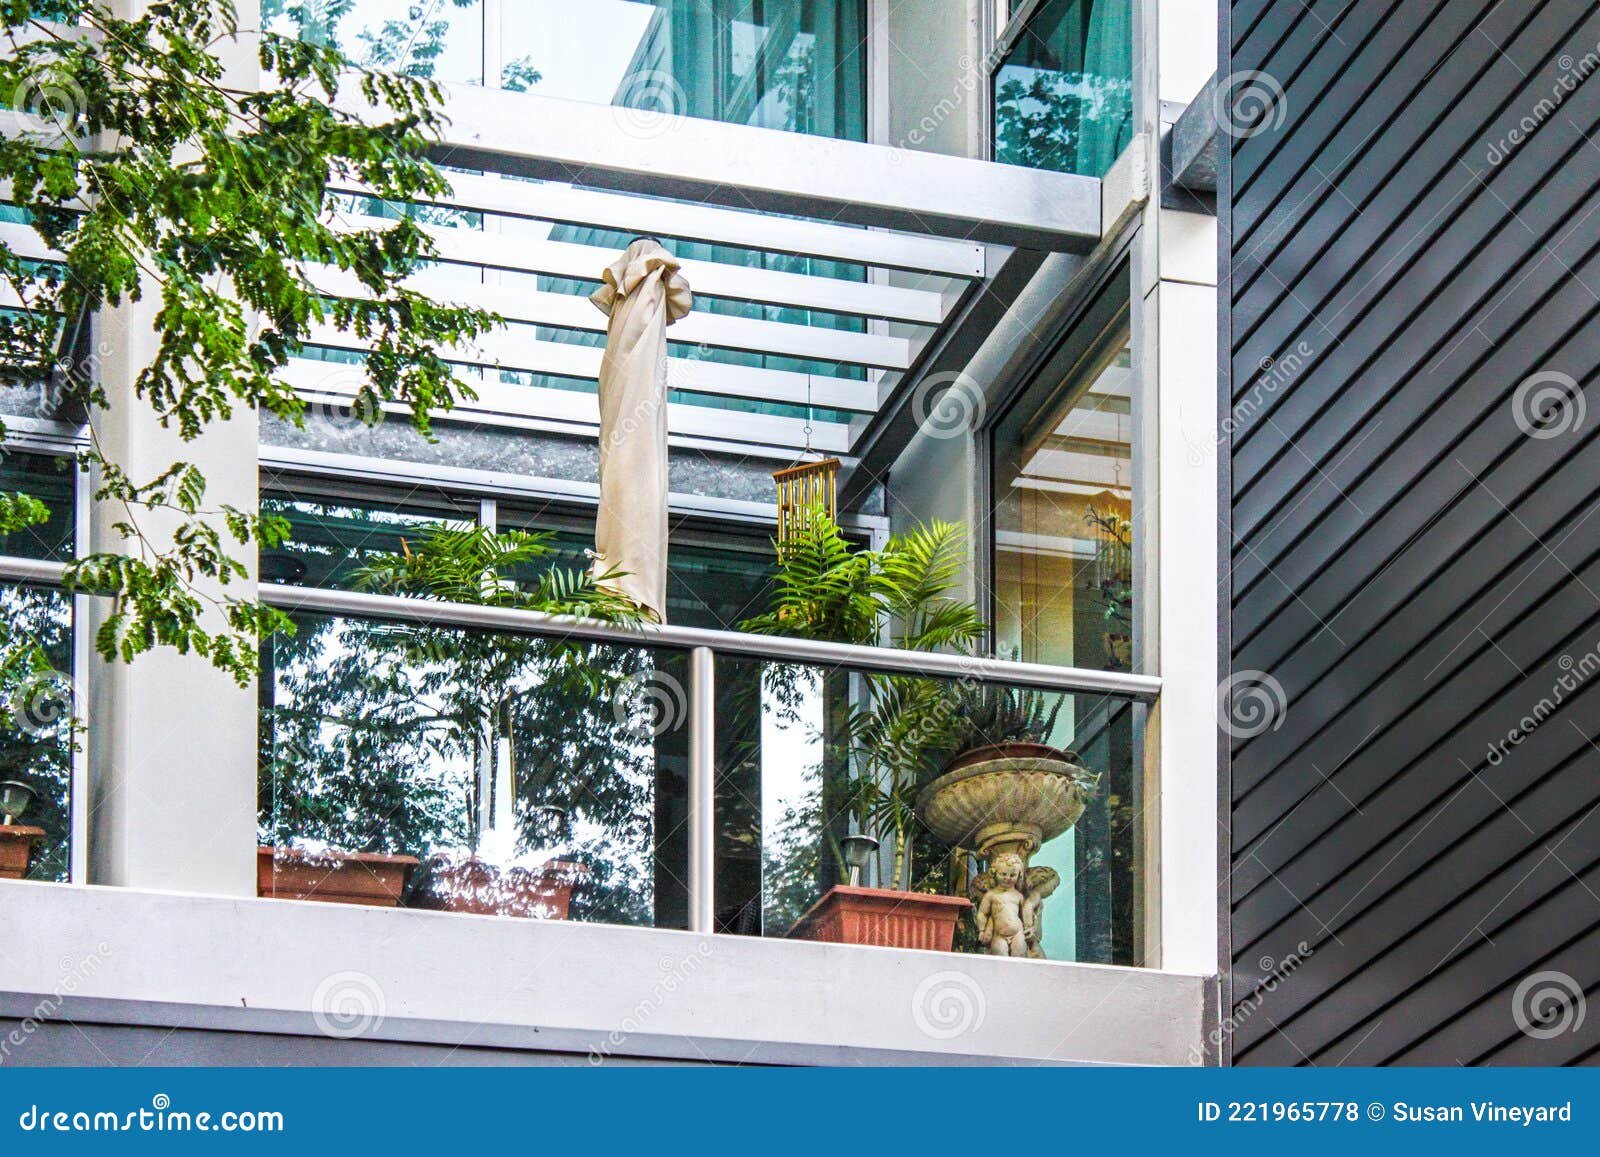 looking up al elegant modern balcony with interesting archetecture and potted plants and an umbrella